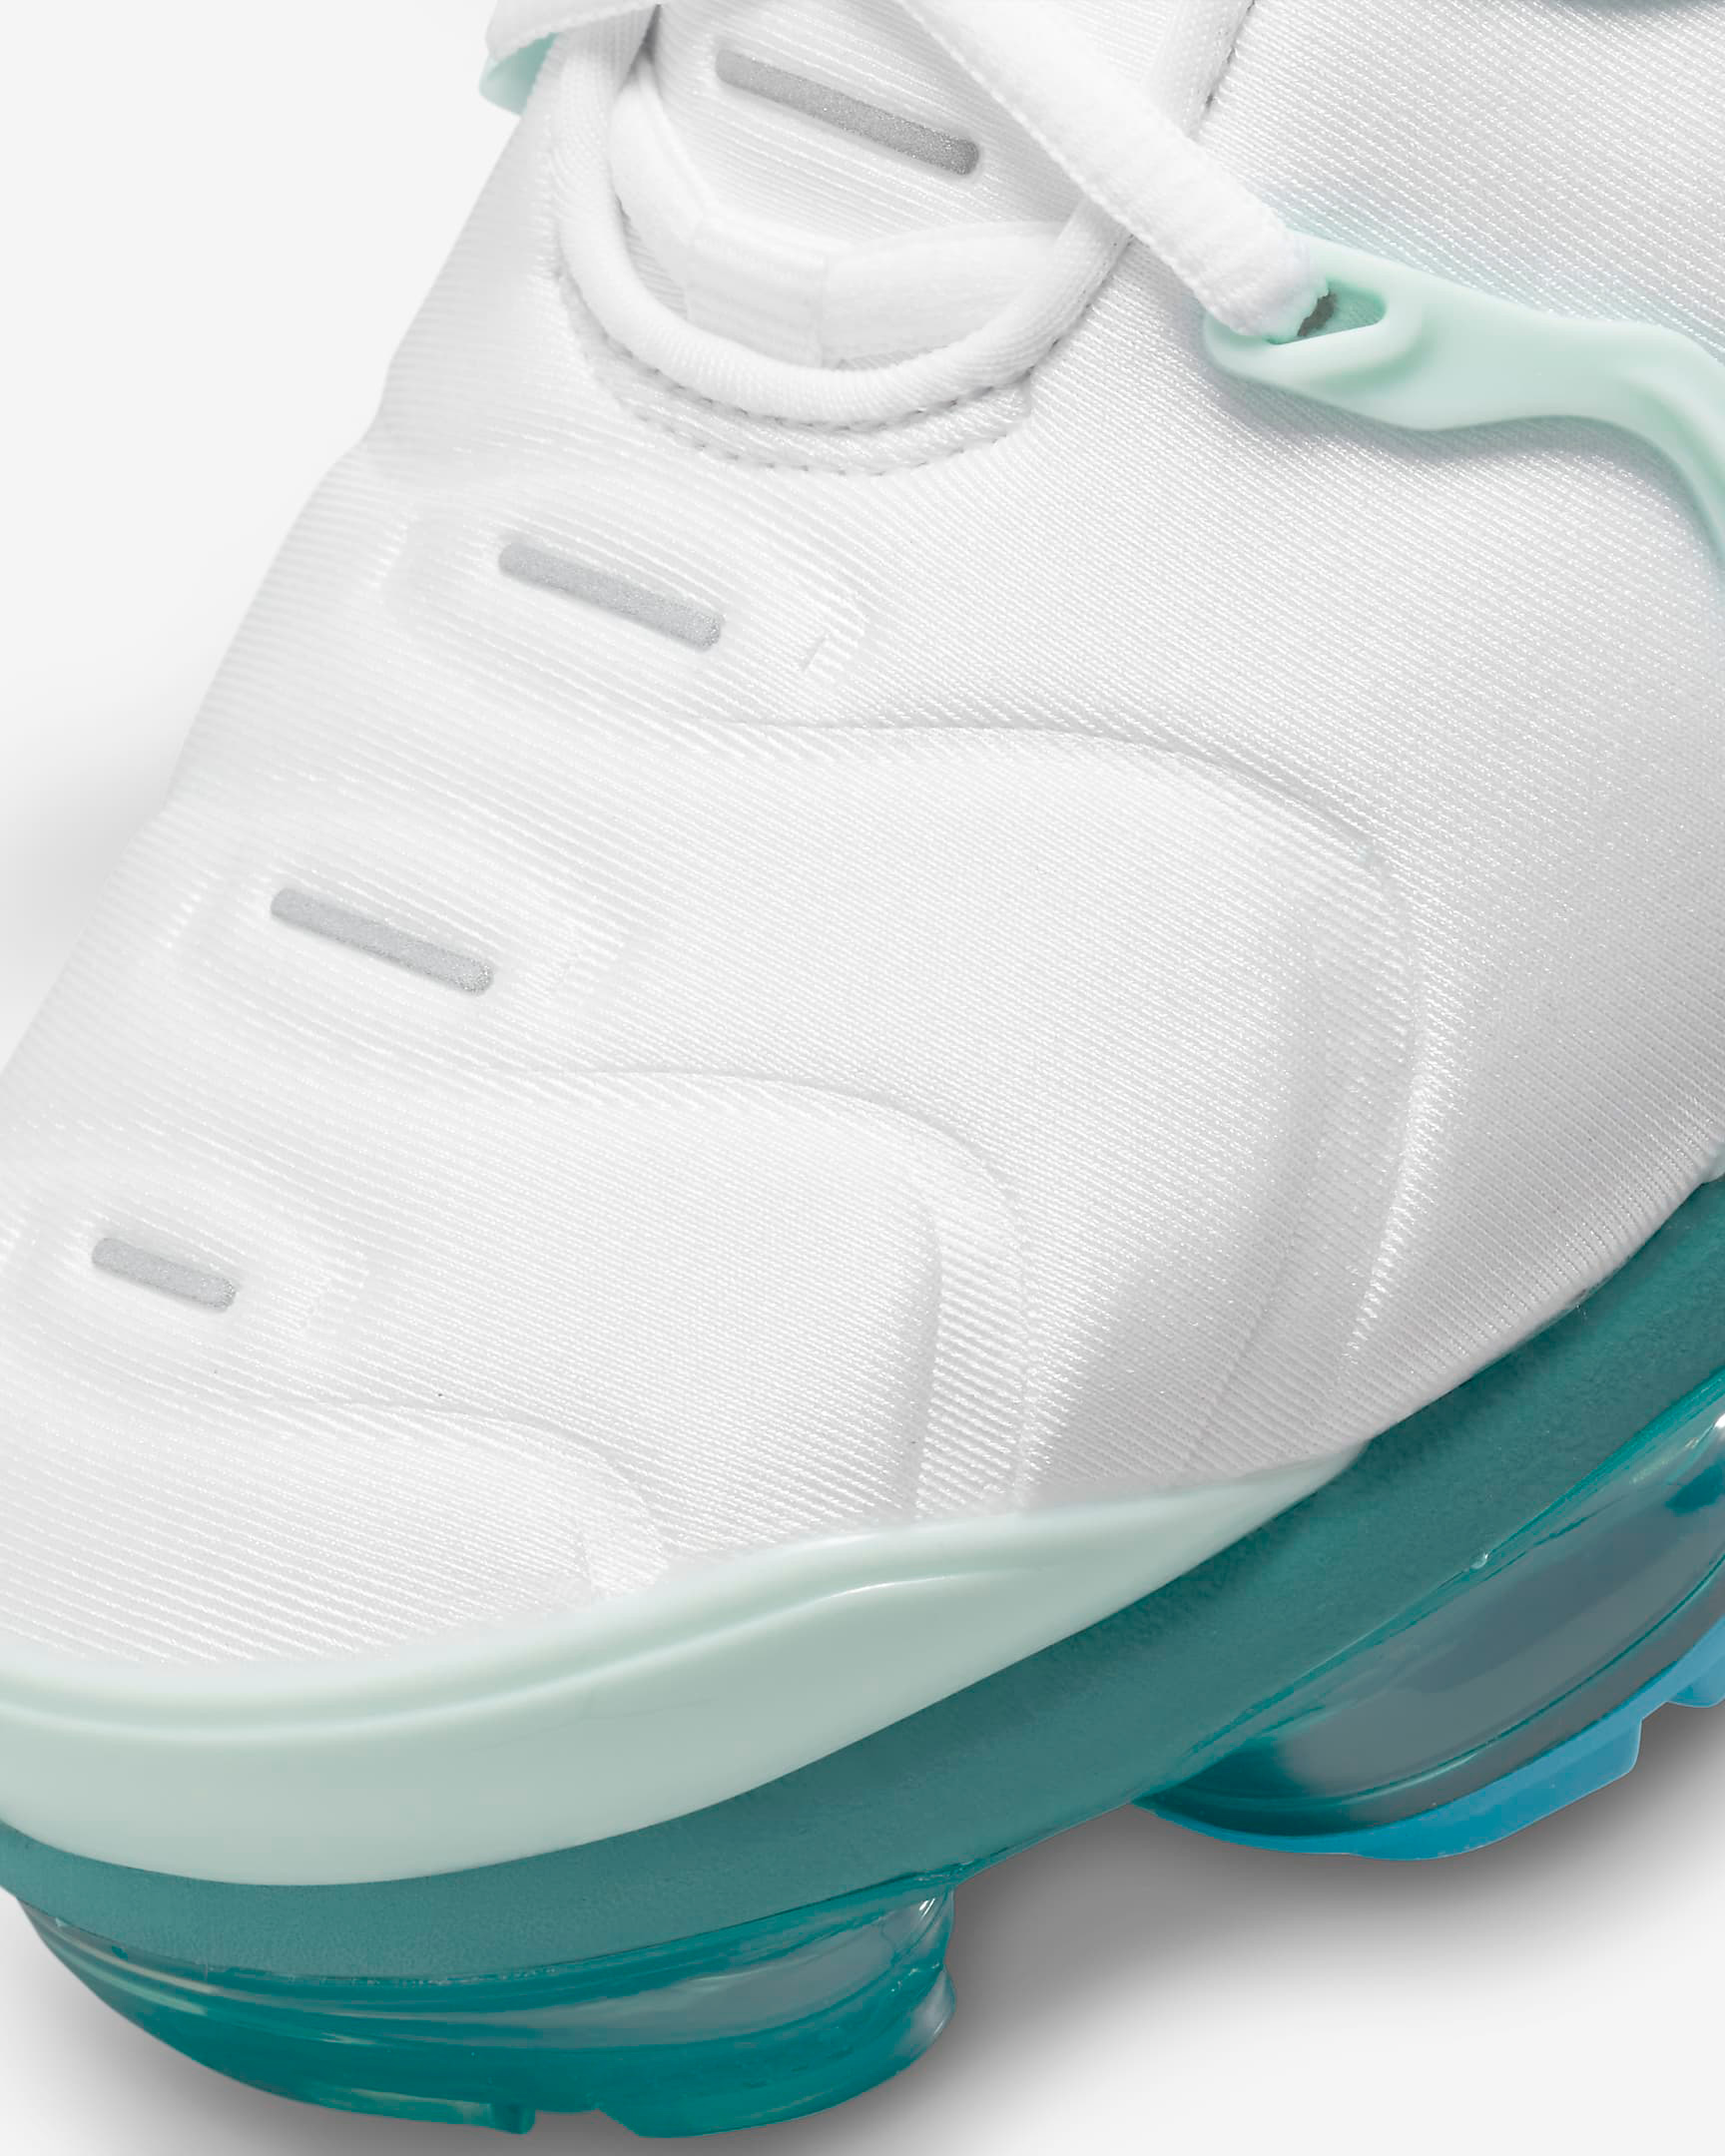 nike-air-vapormax-plus-white-mint-foam-washed-teal-siren-red-6